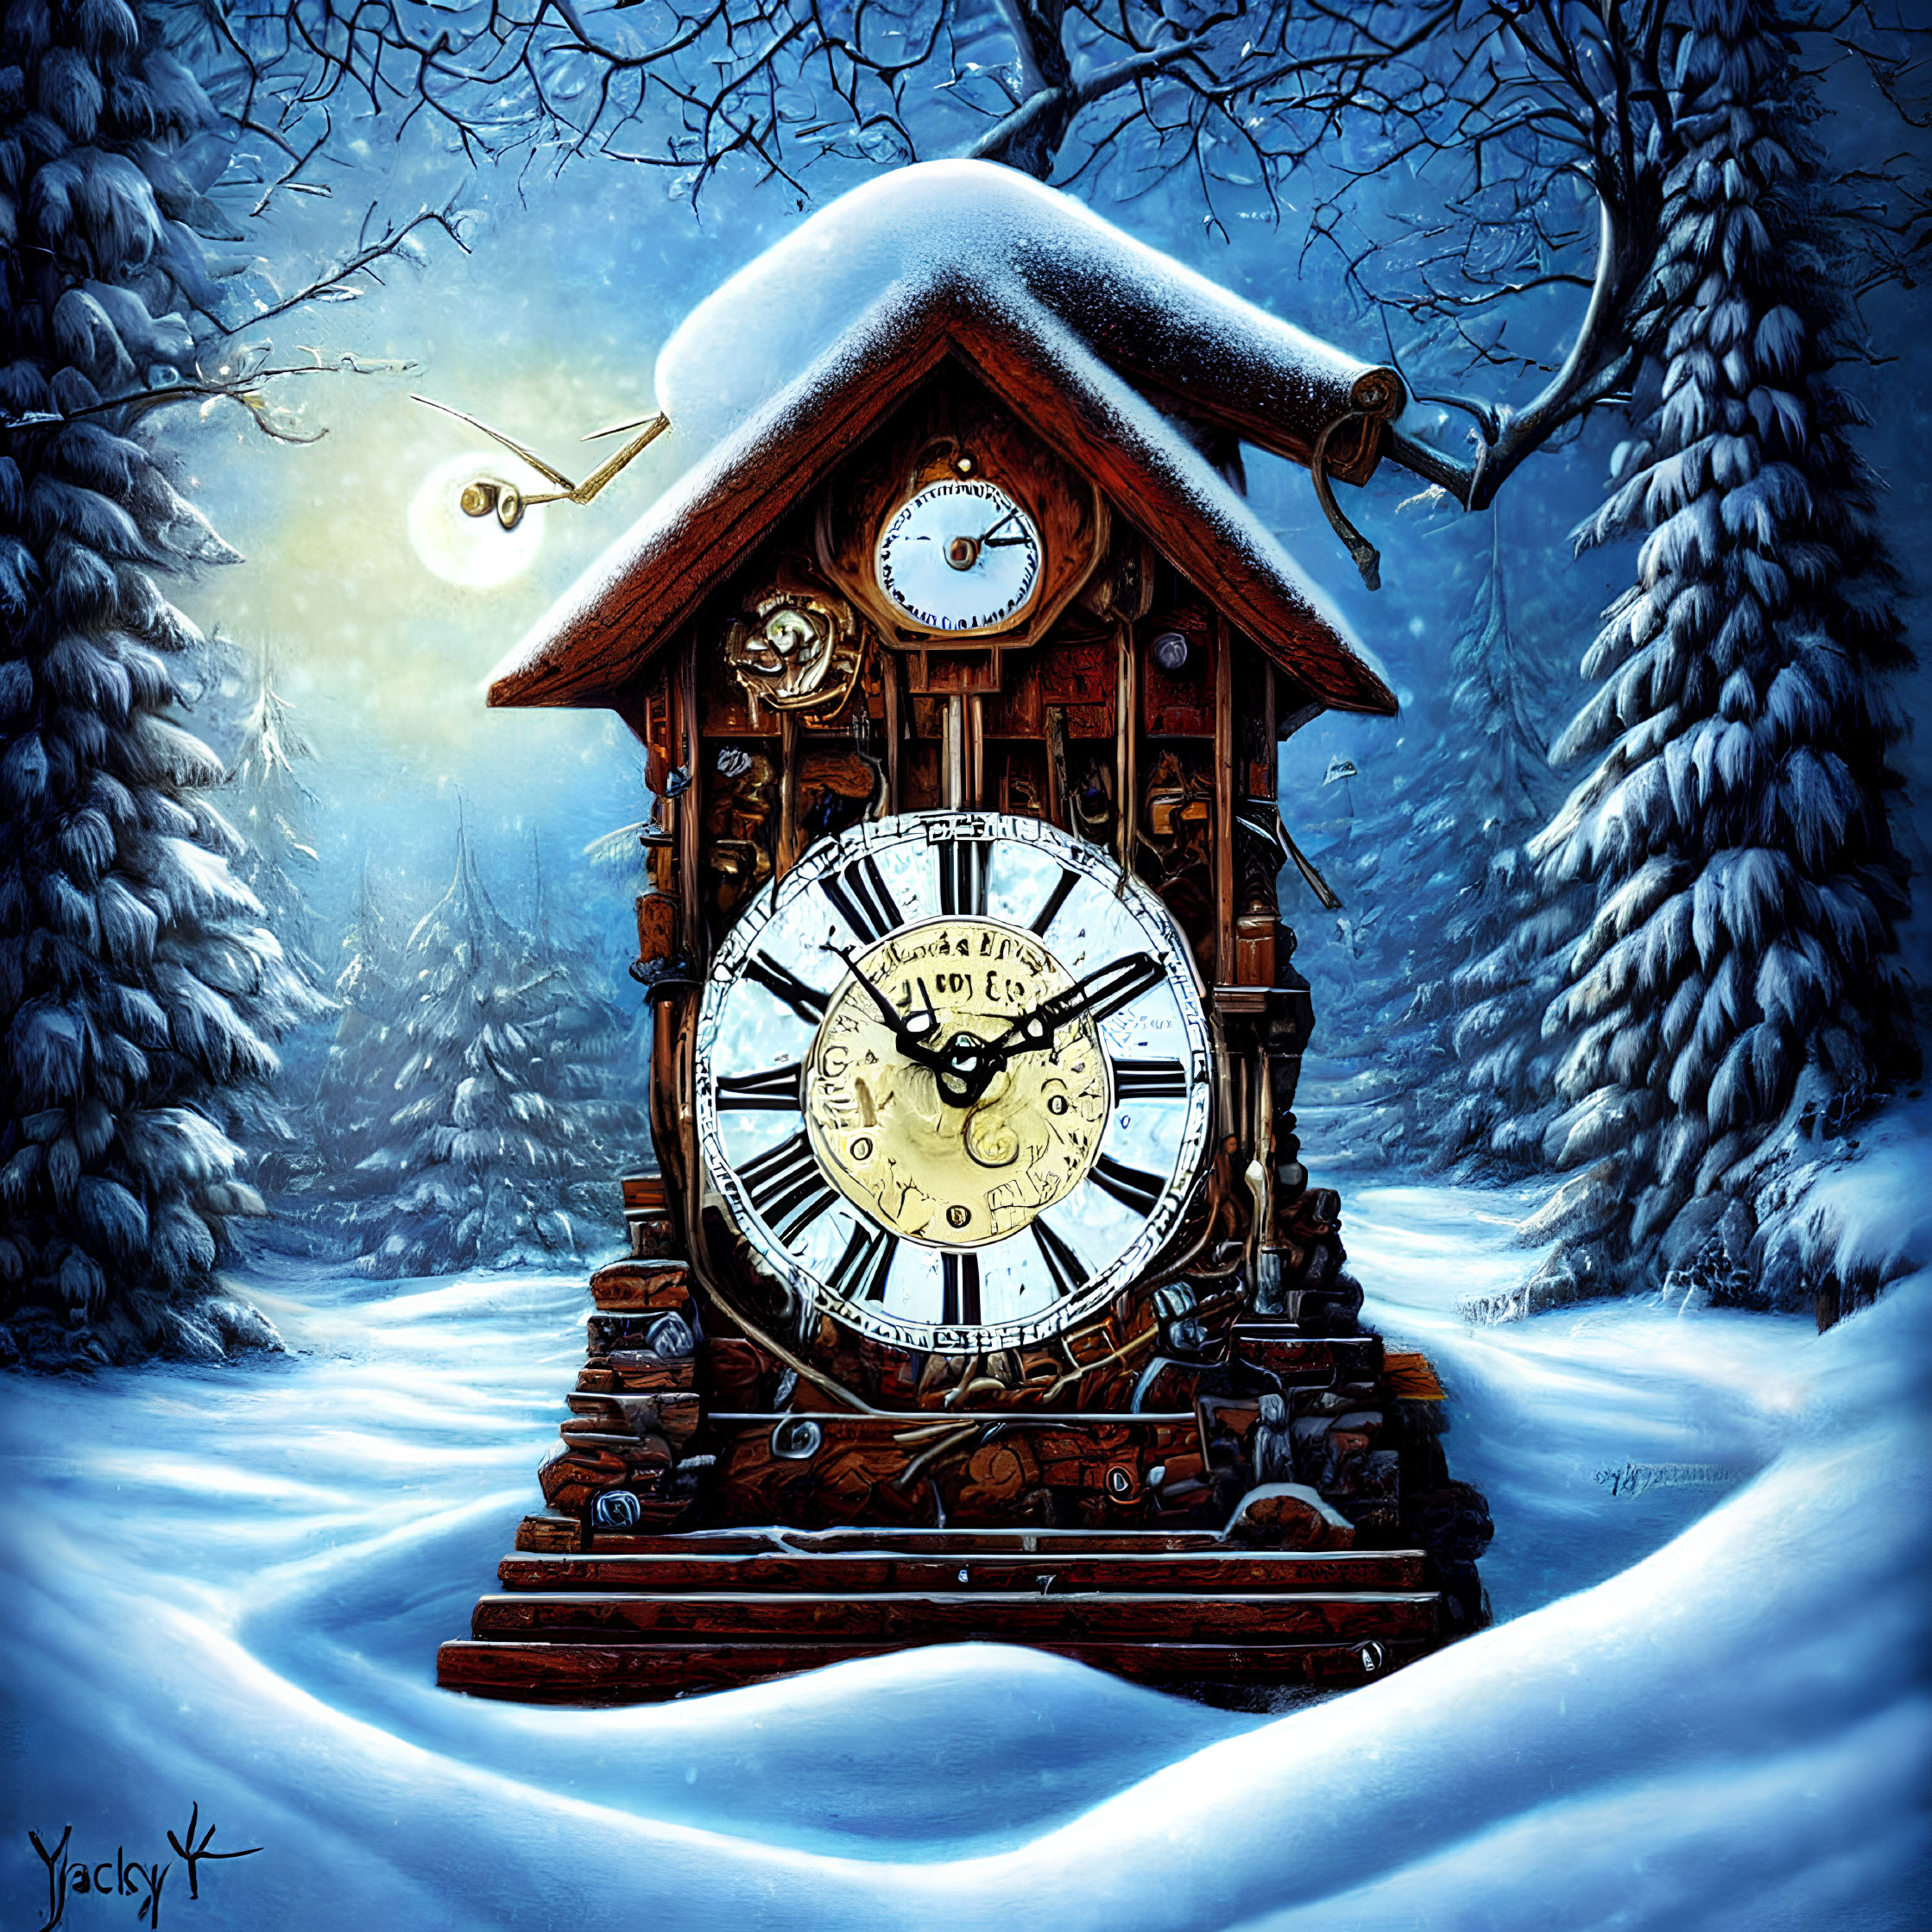 Whimsical snowy forest scene with ornate cuckoo clock